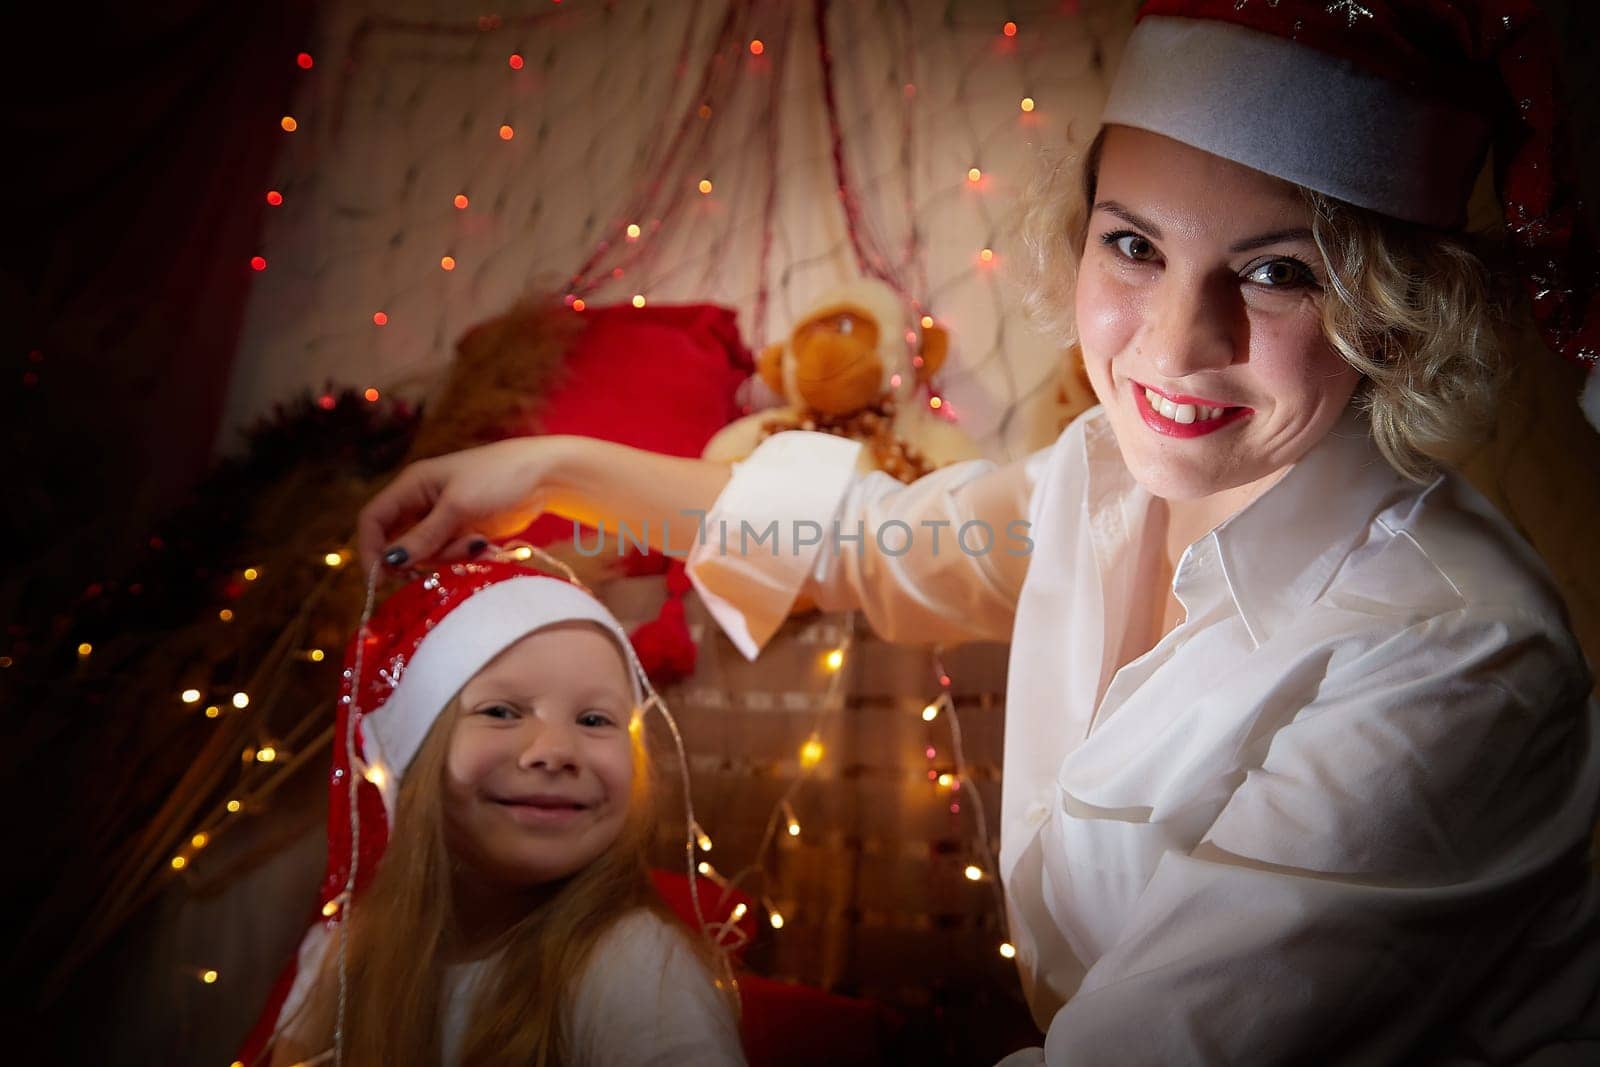 Cute mother and daughter in the red hats of Santa Claus assistants in a room decorated for Christmas. The tradition of decorating house and dressing up for the holidays. Happy childhood and motherhood by keleny